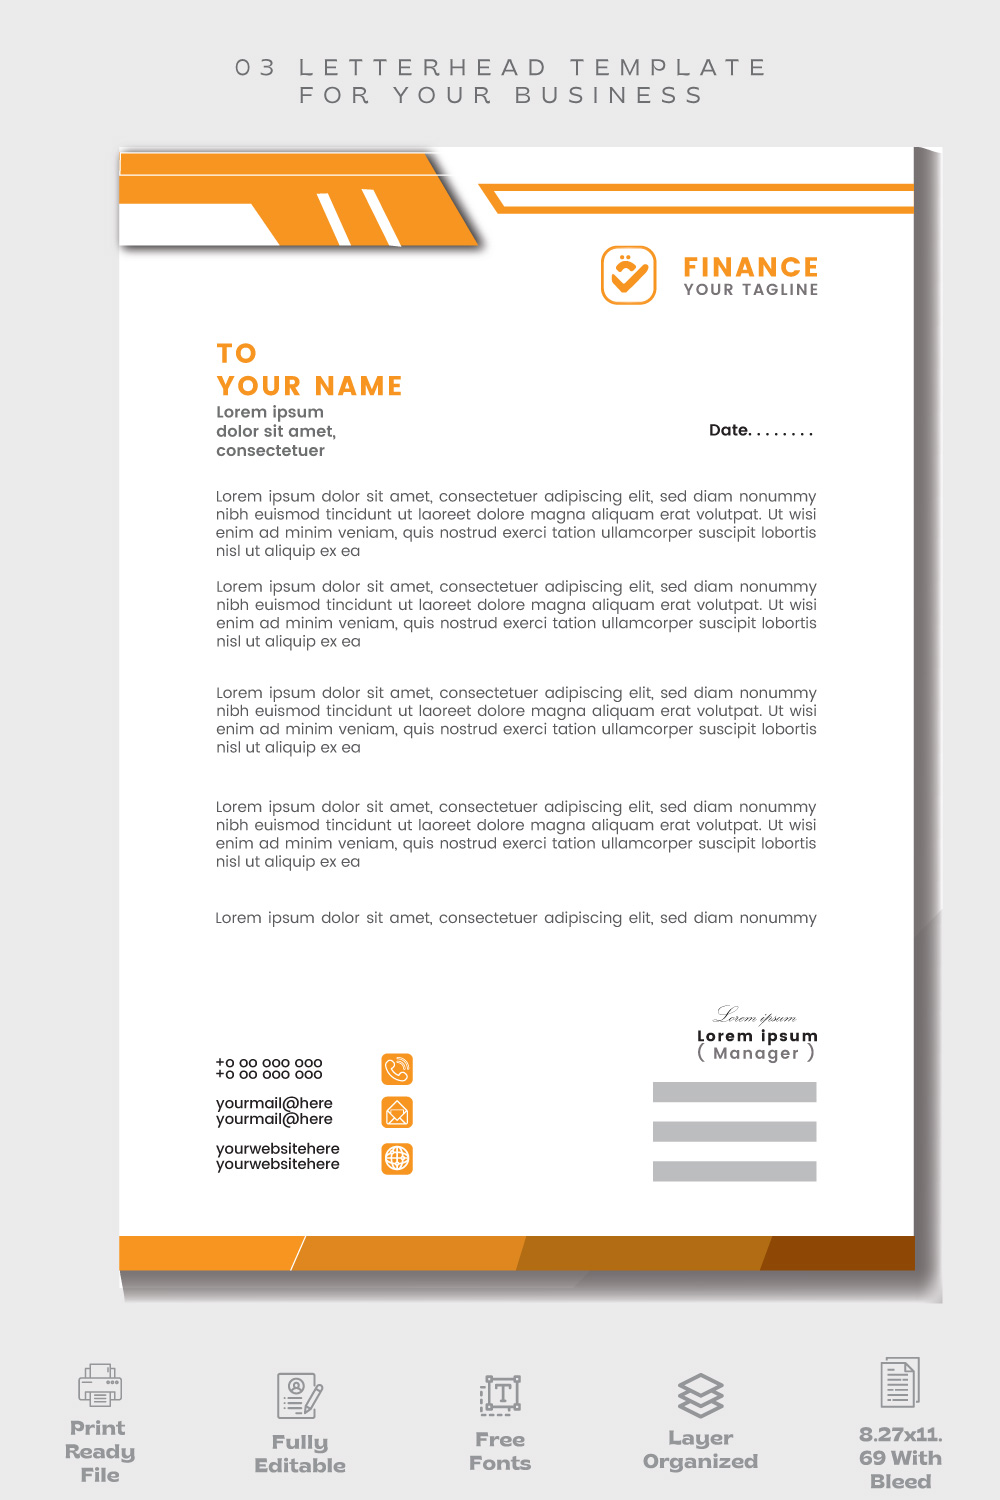 Letterhead for a company with orange accents.